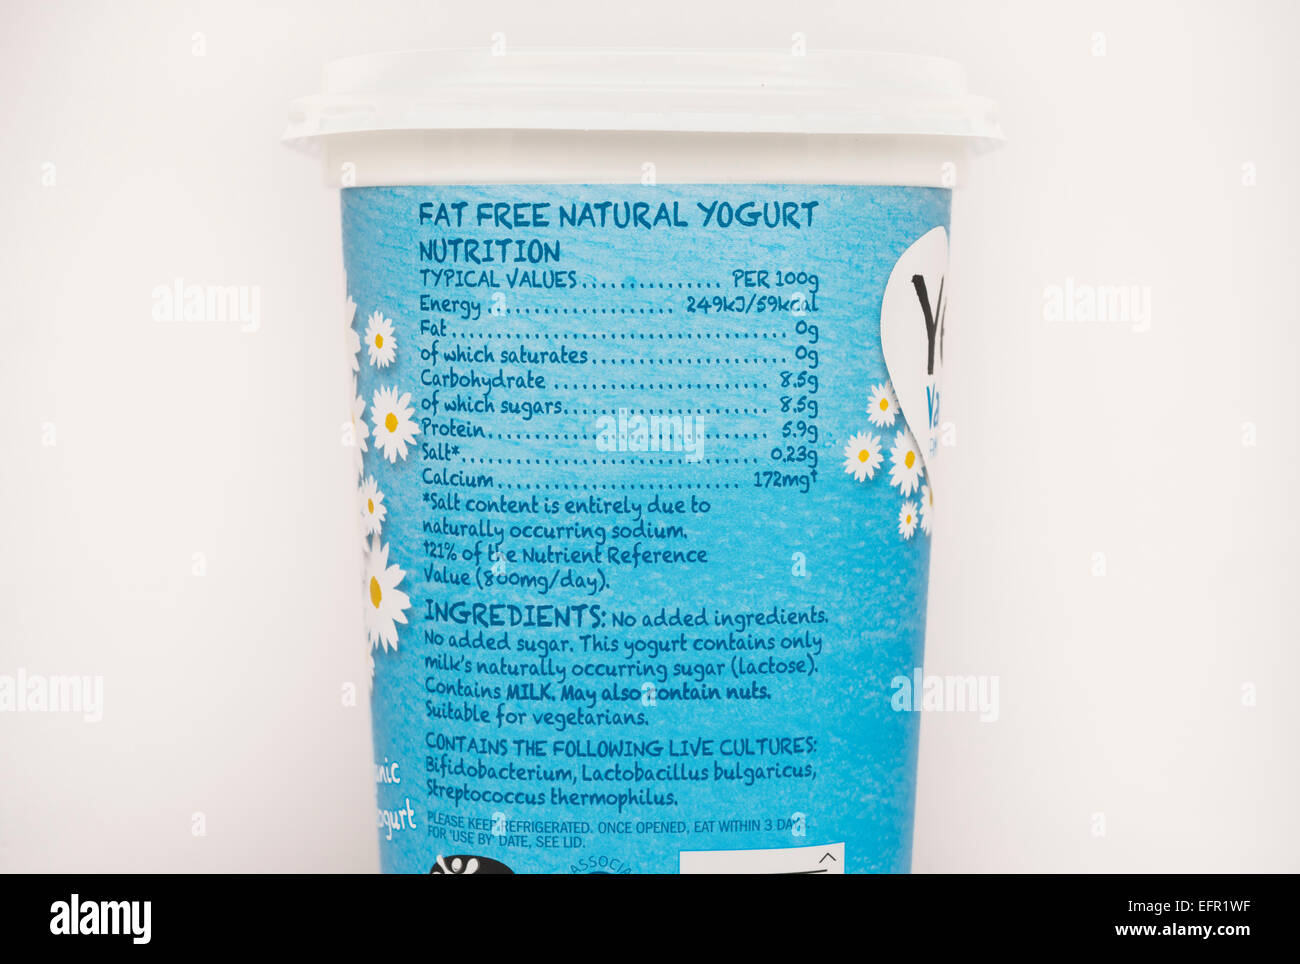 Nutritional information on a tub of Yeo Valley 0% Fat Natural Yogurt. Stock Photo